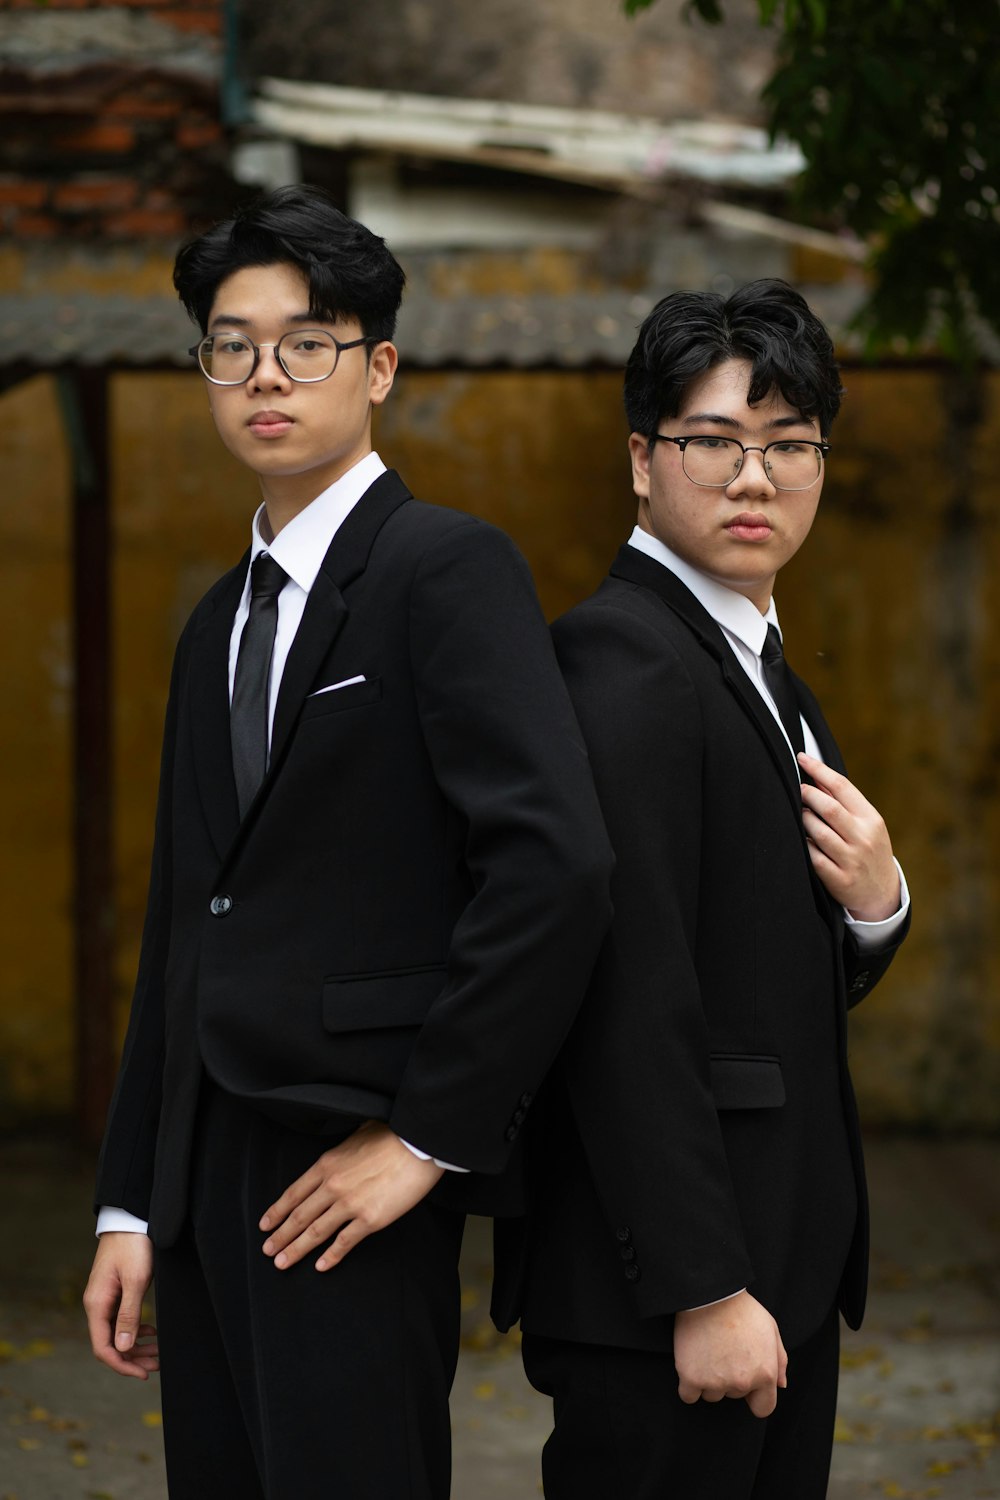 two young men in suits standing next to each other